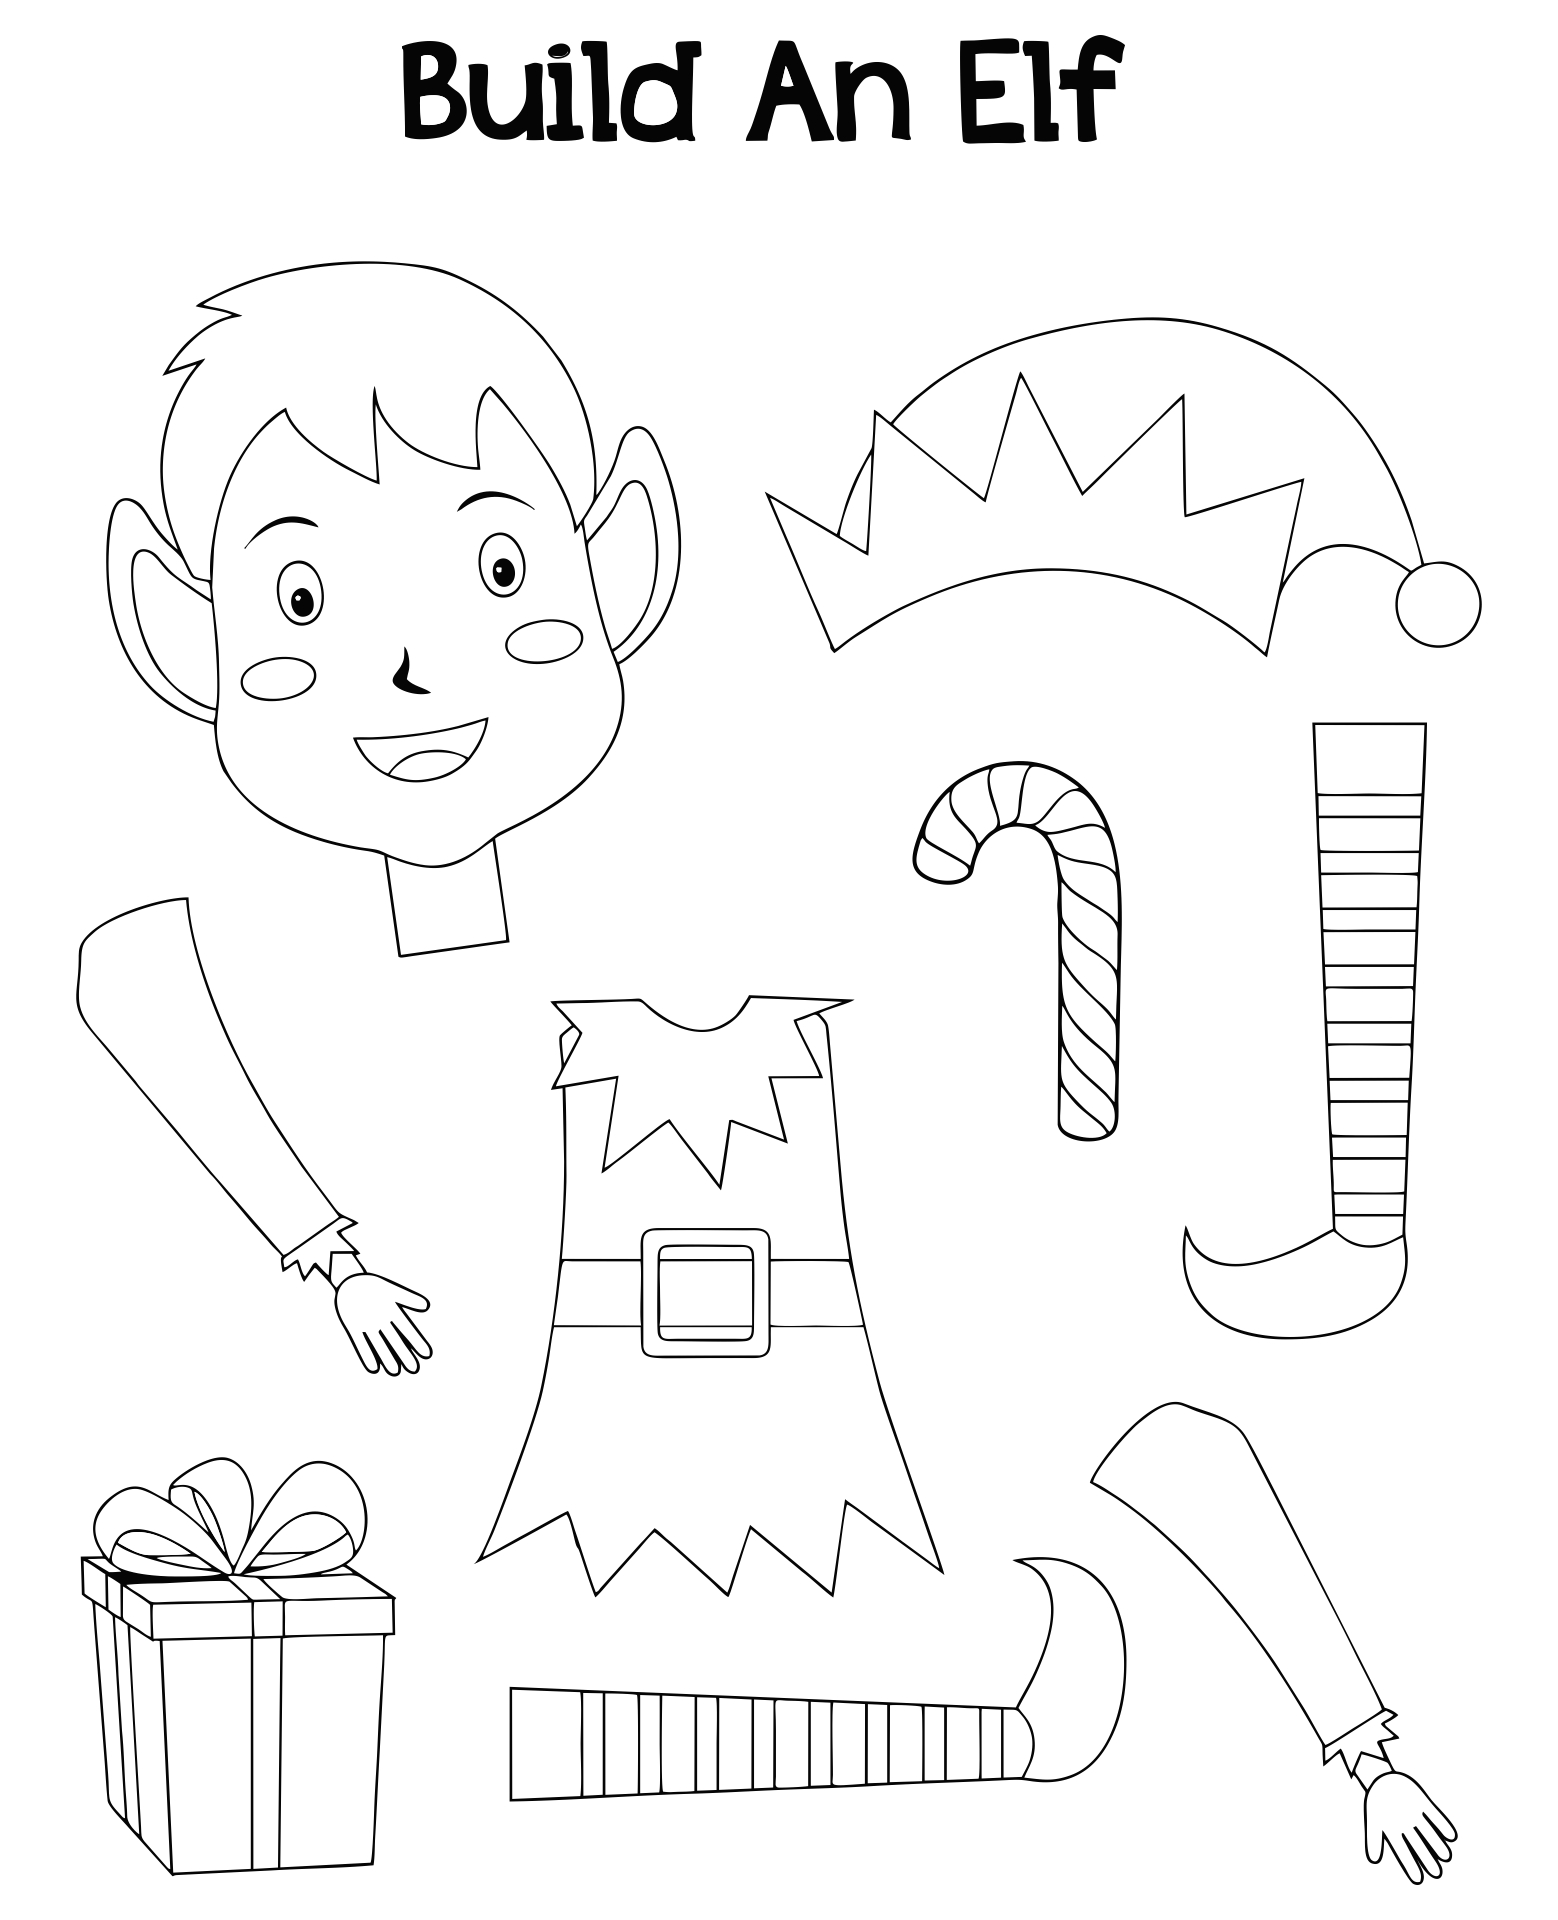 cut-out-elf-template-printable-free-printable-templates